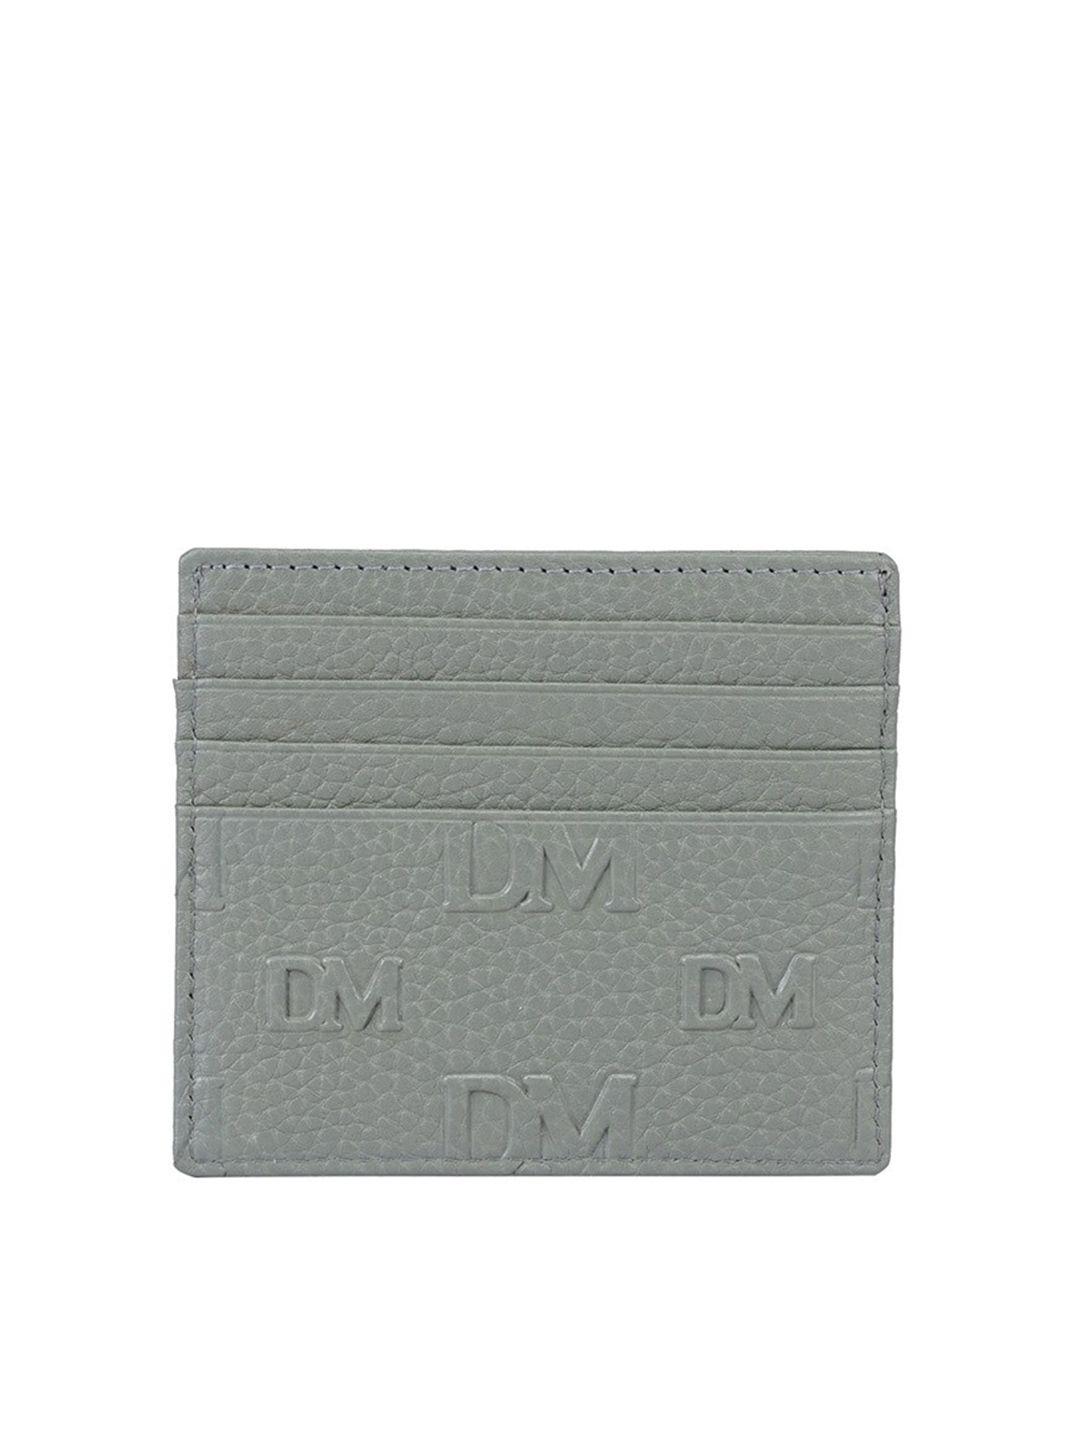 da milano typography textured leather card holder